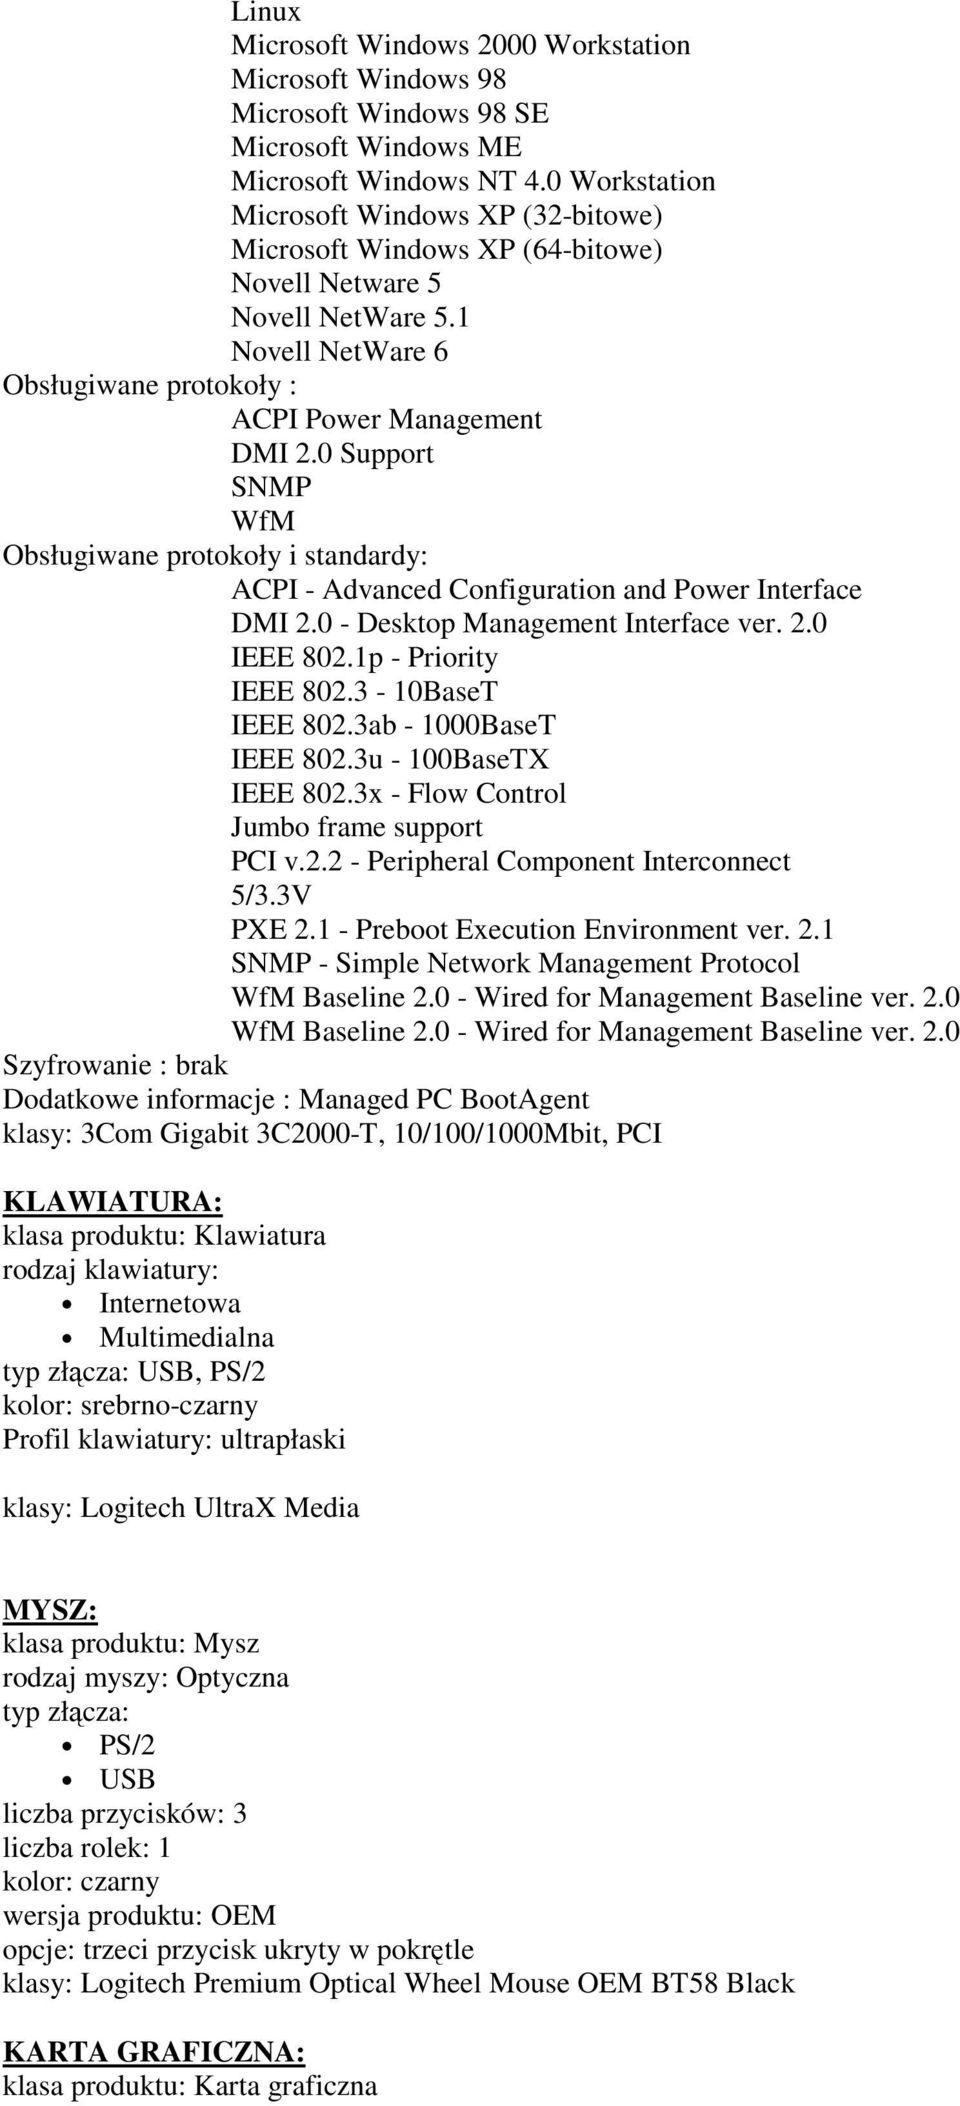 0 Support SNMP WfM Obsługiwane protokoły i standardy: ACPI - Advanced Configuration and Power Interface DMI 2.0 - Desktop Management Interface ver. 2.0 IEEE 802.1p - Priority IEEE 802.